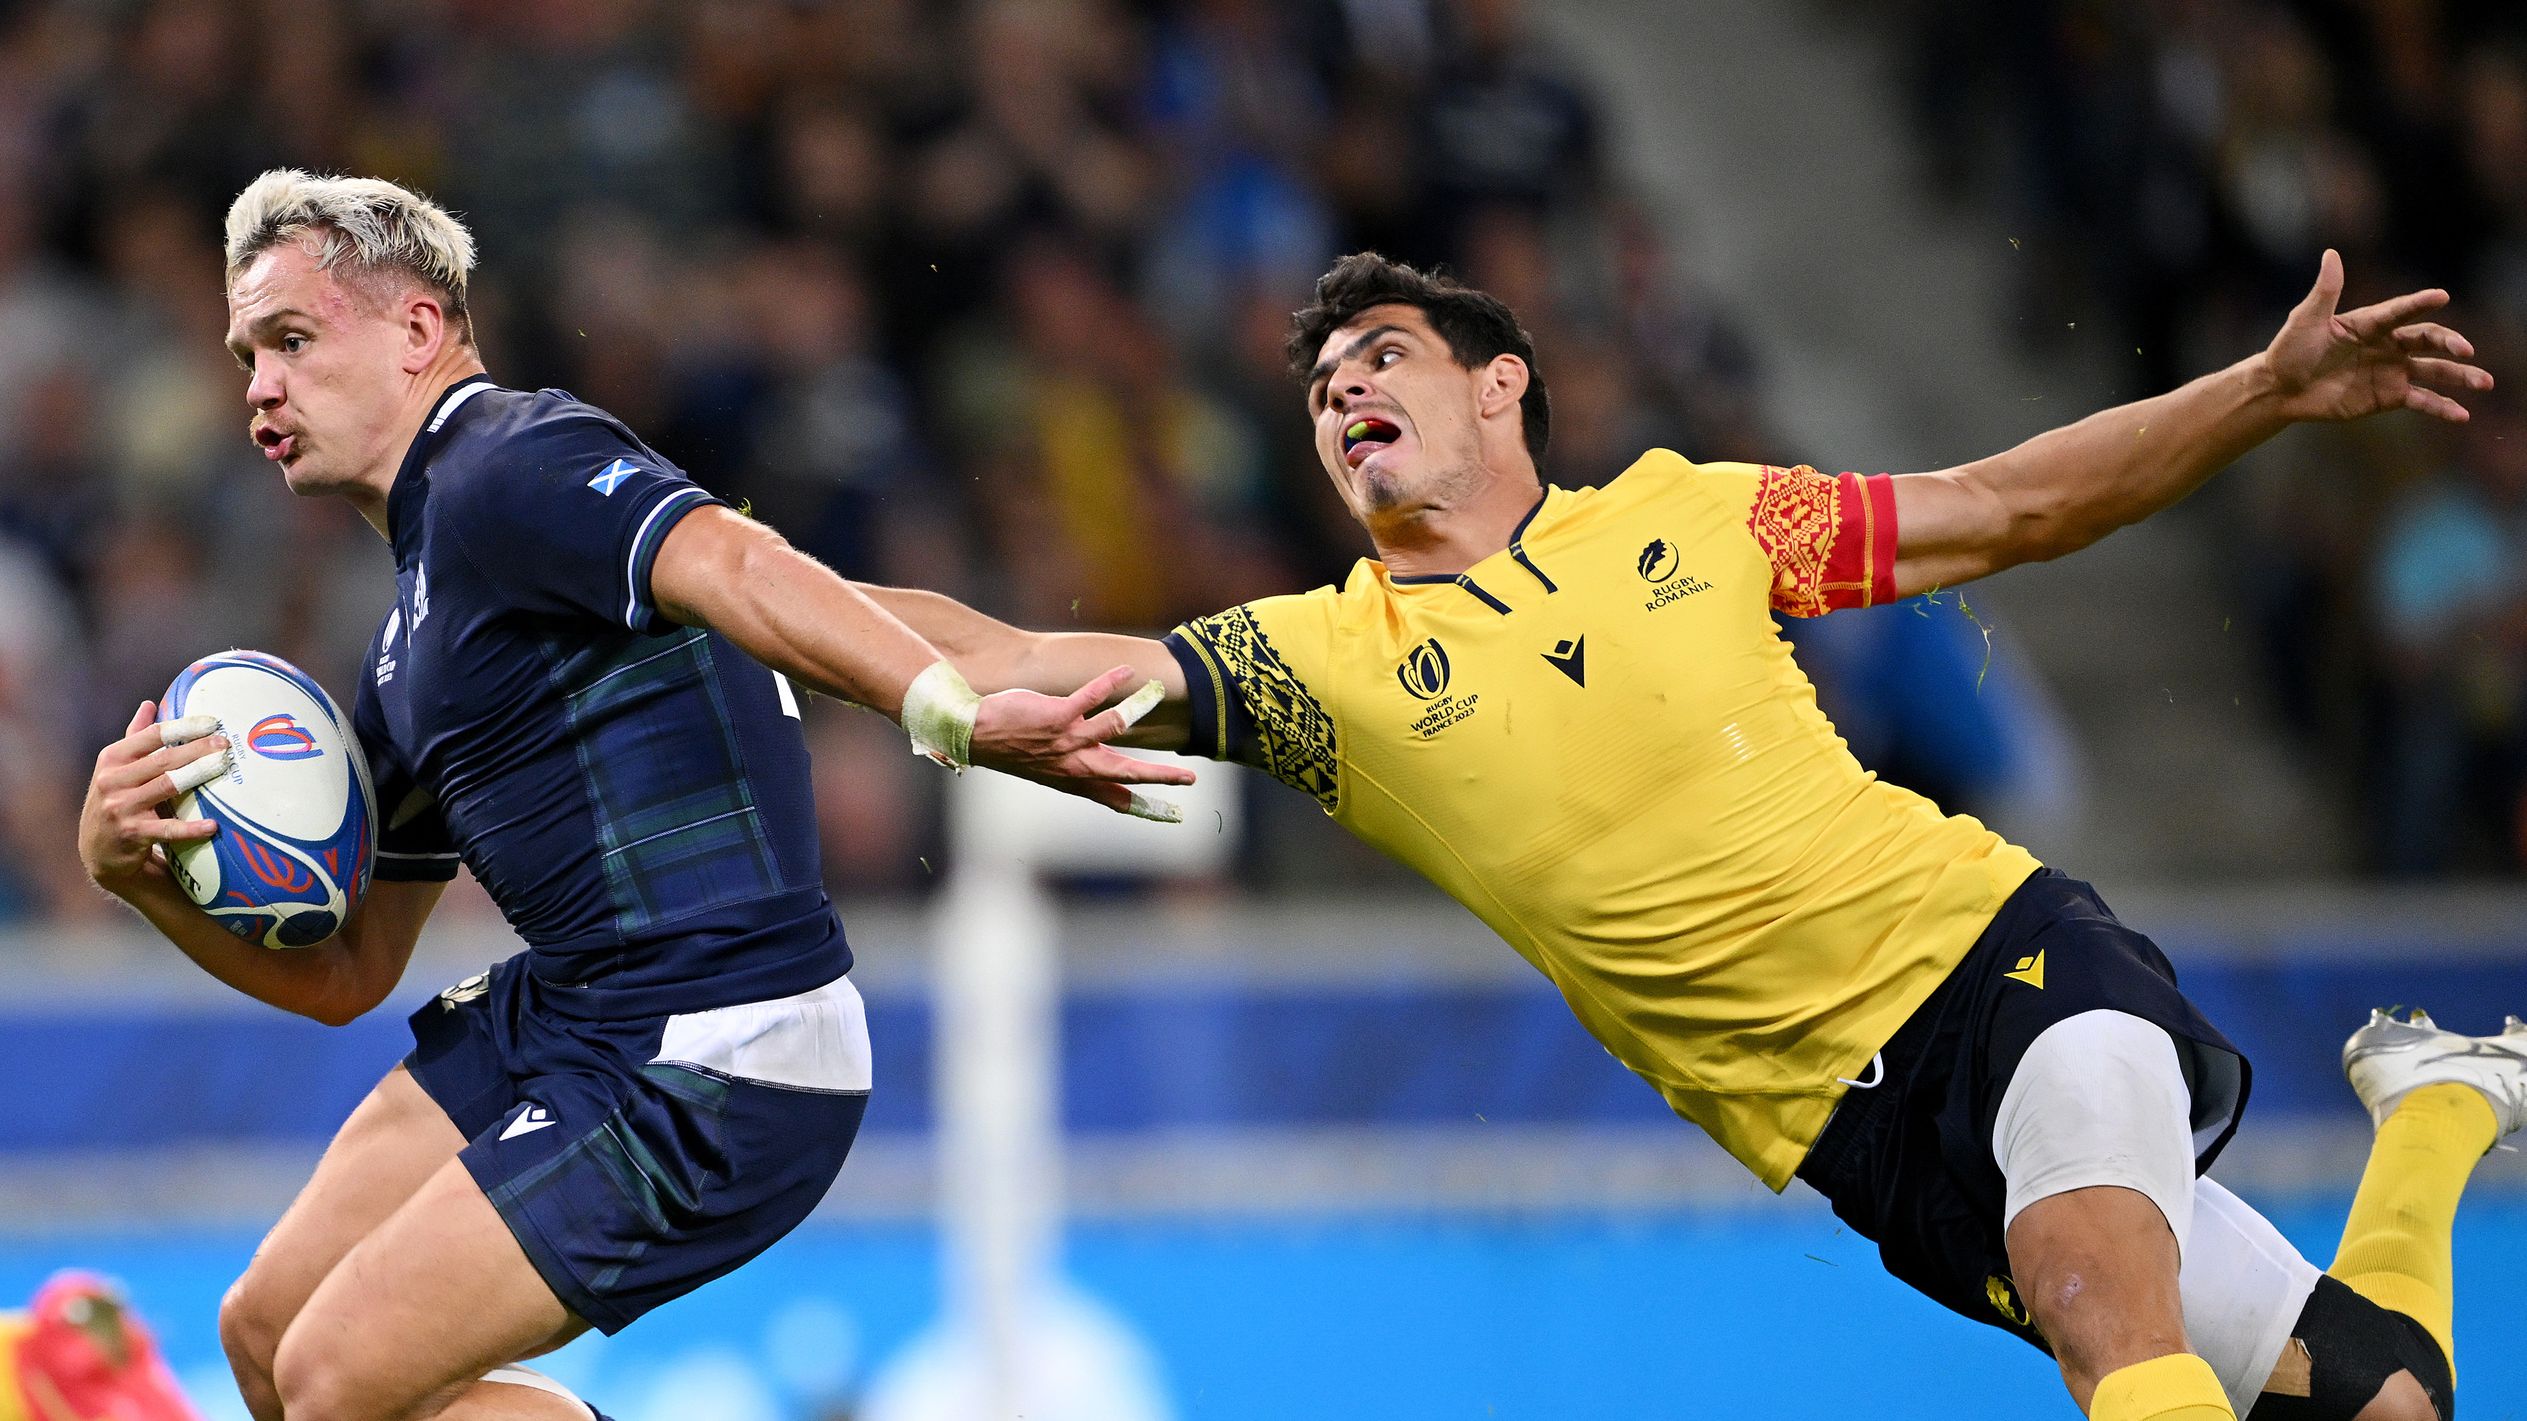 Darcy Graham of Scotland evades Marius Simionescu of Romania before scoring a try.